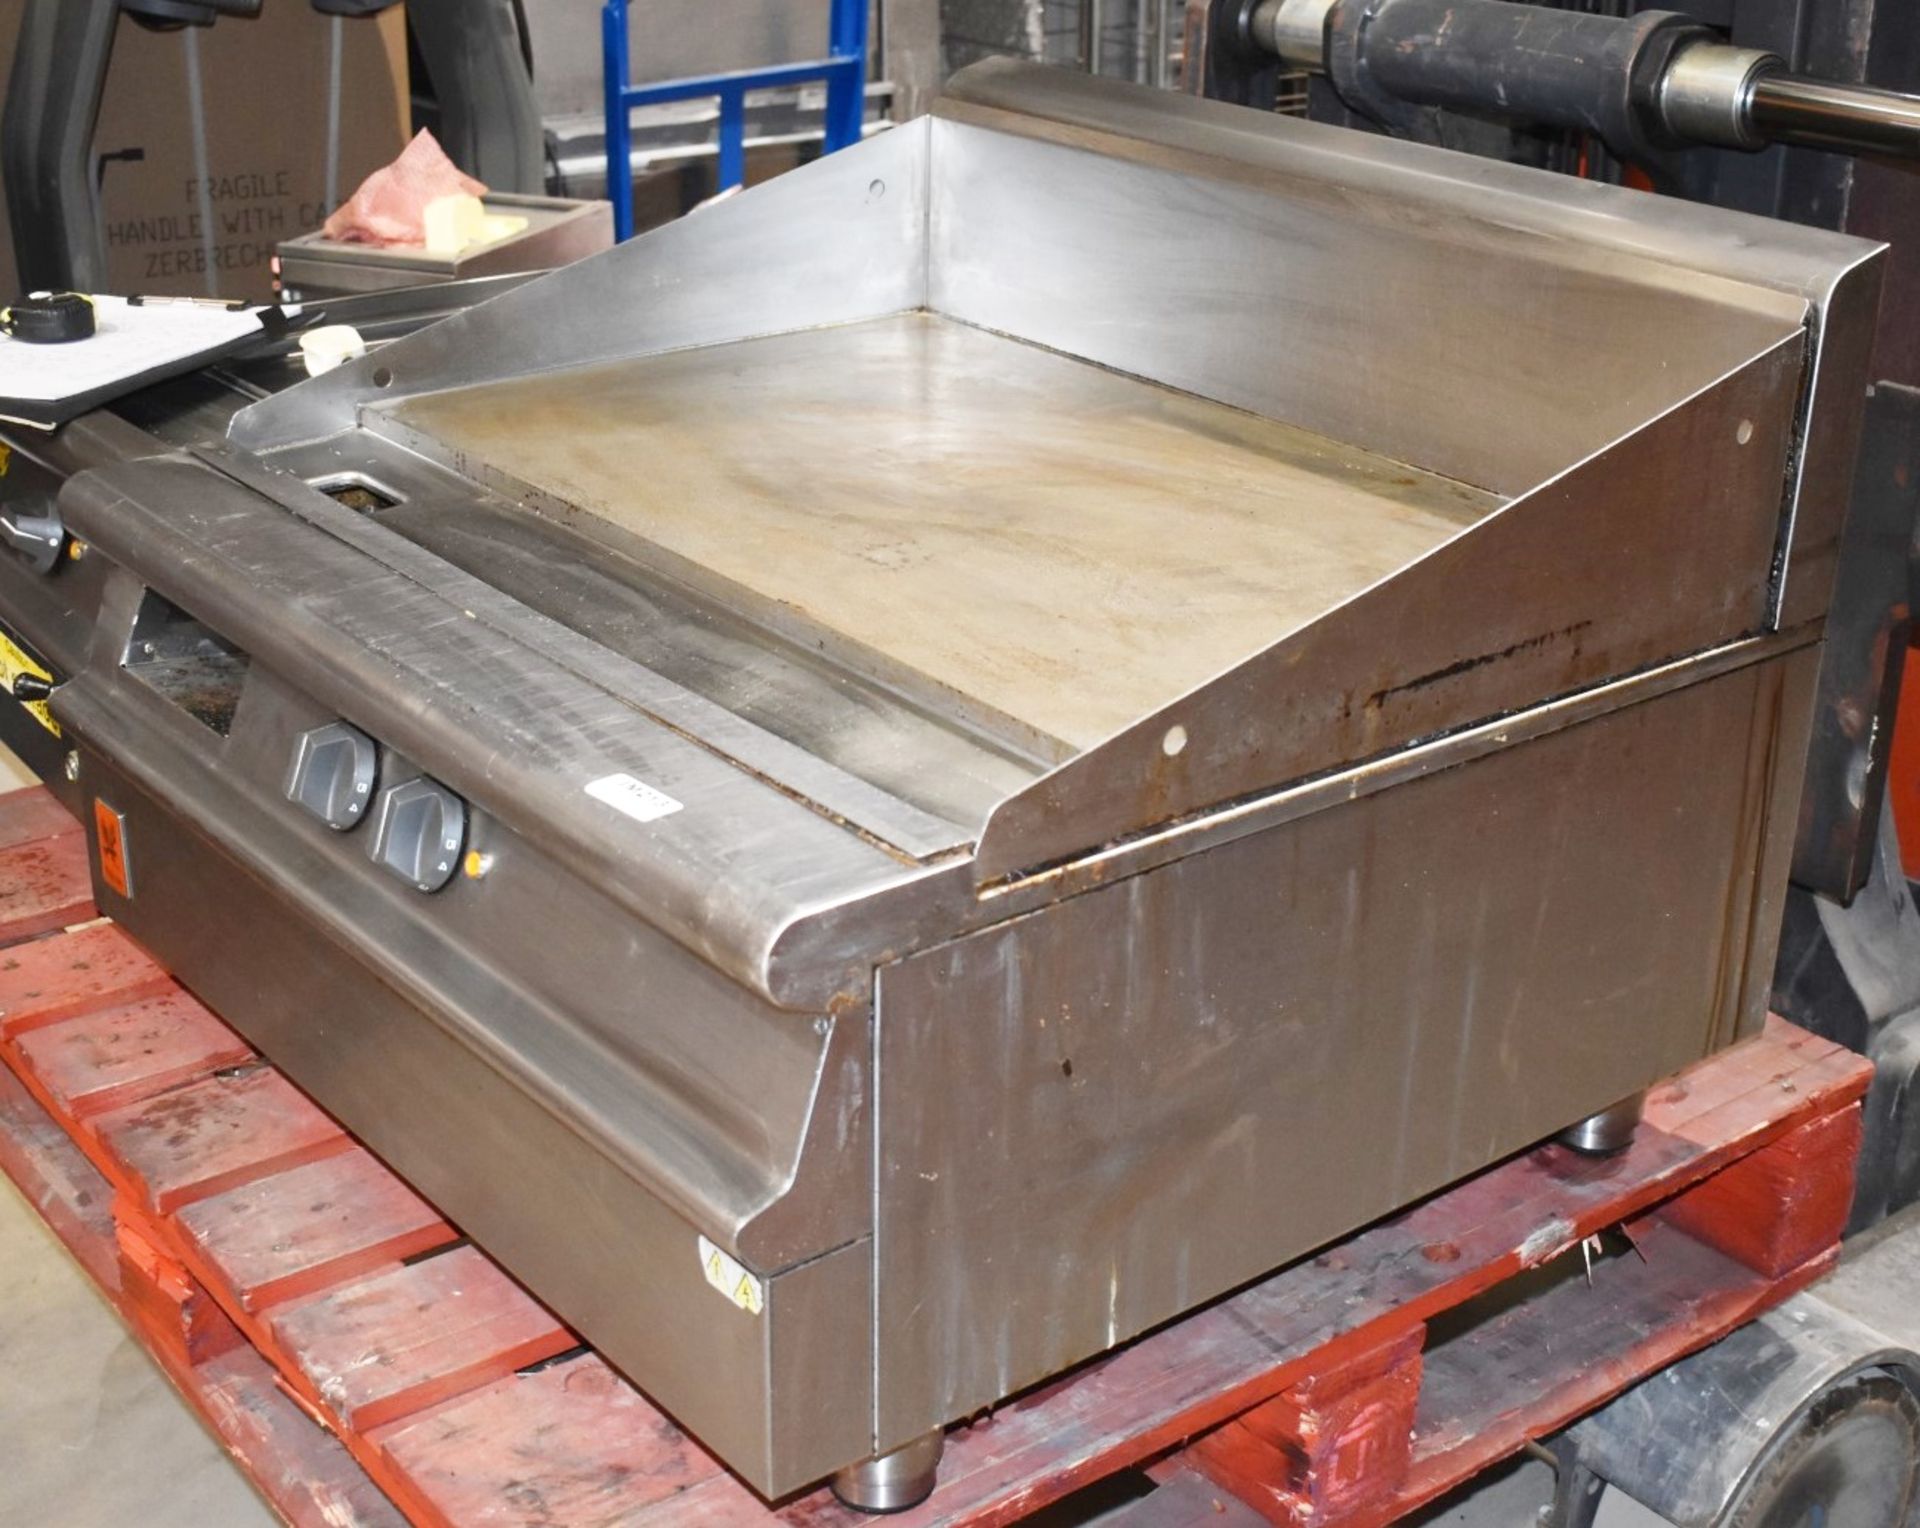 1 x Falcon Dominator E3841 Solid Top Cooking Griddle - Image 2 of 9